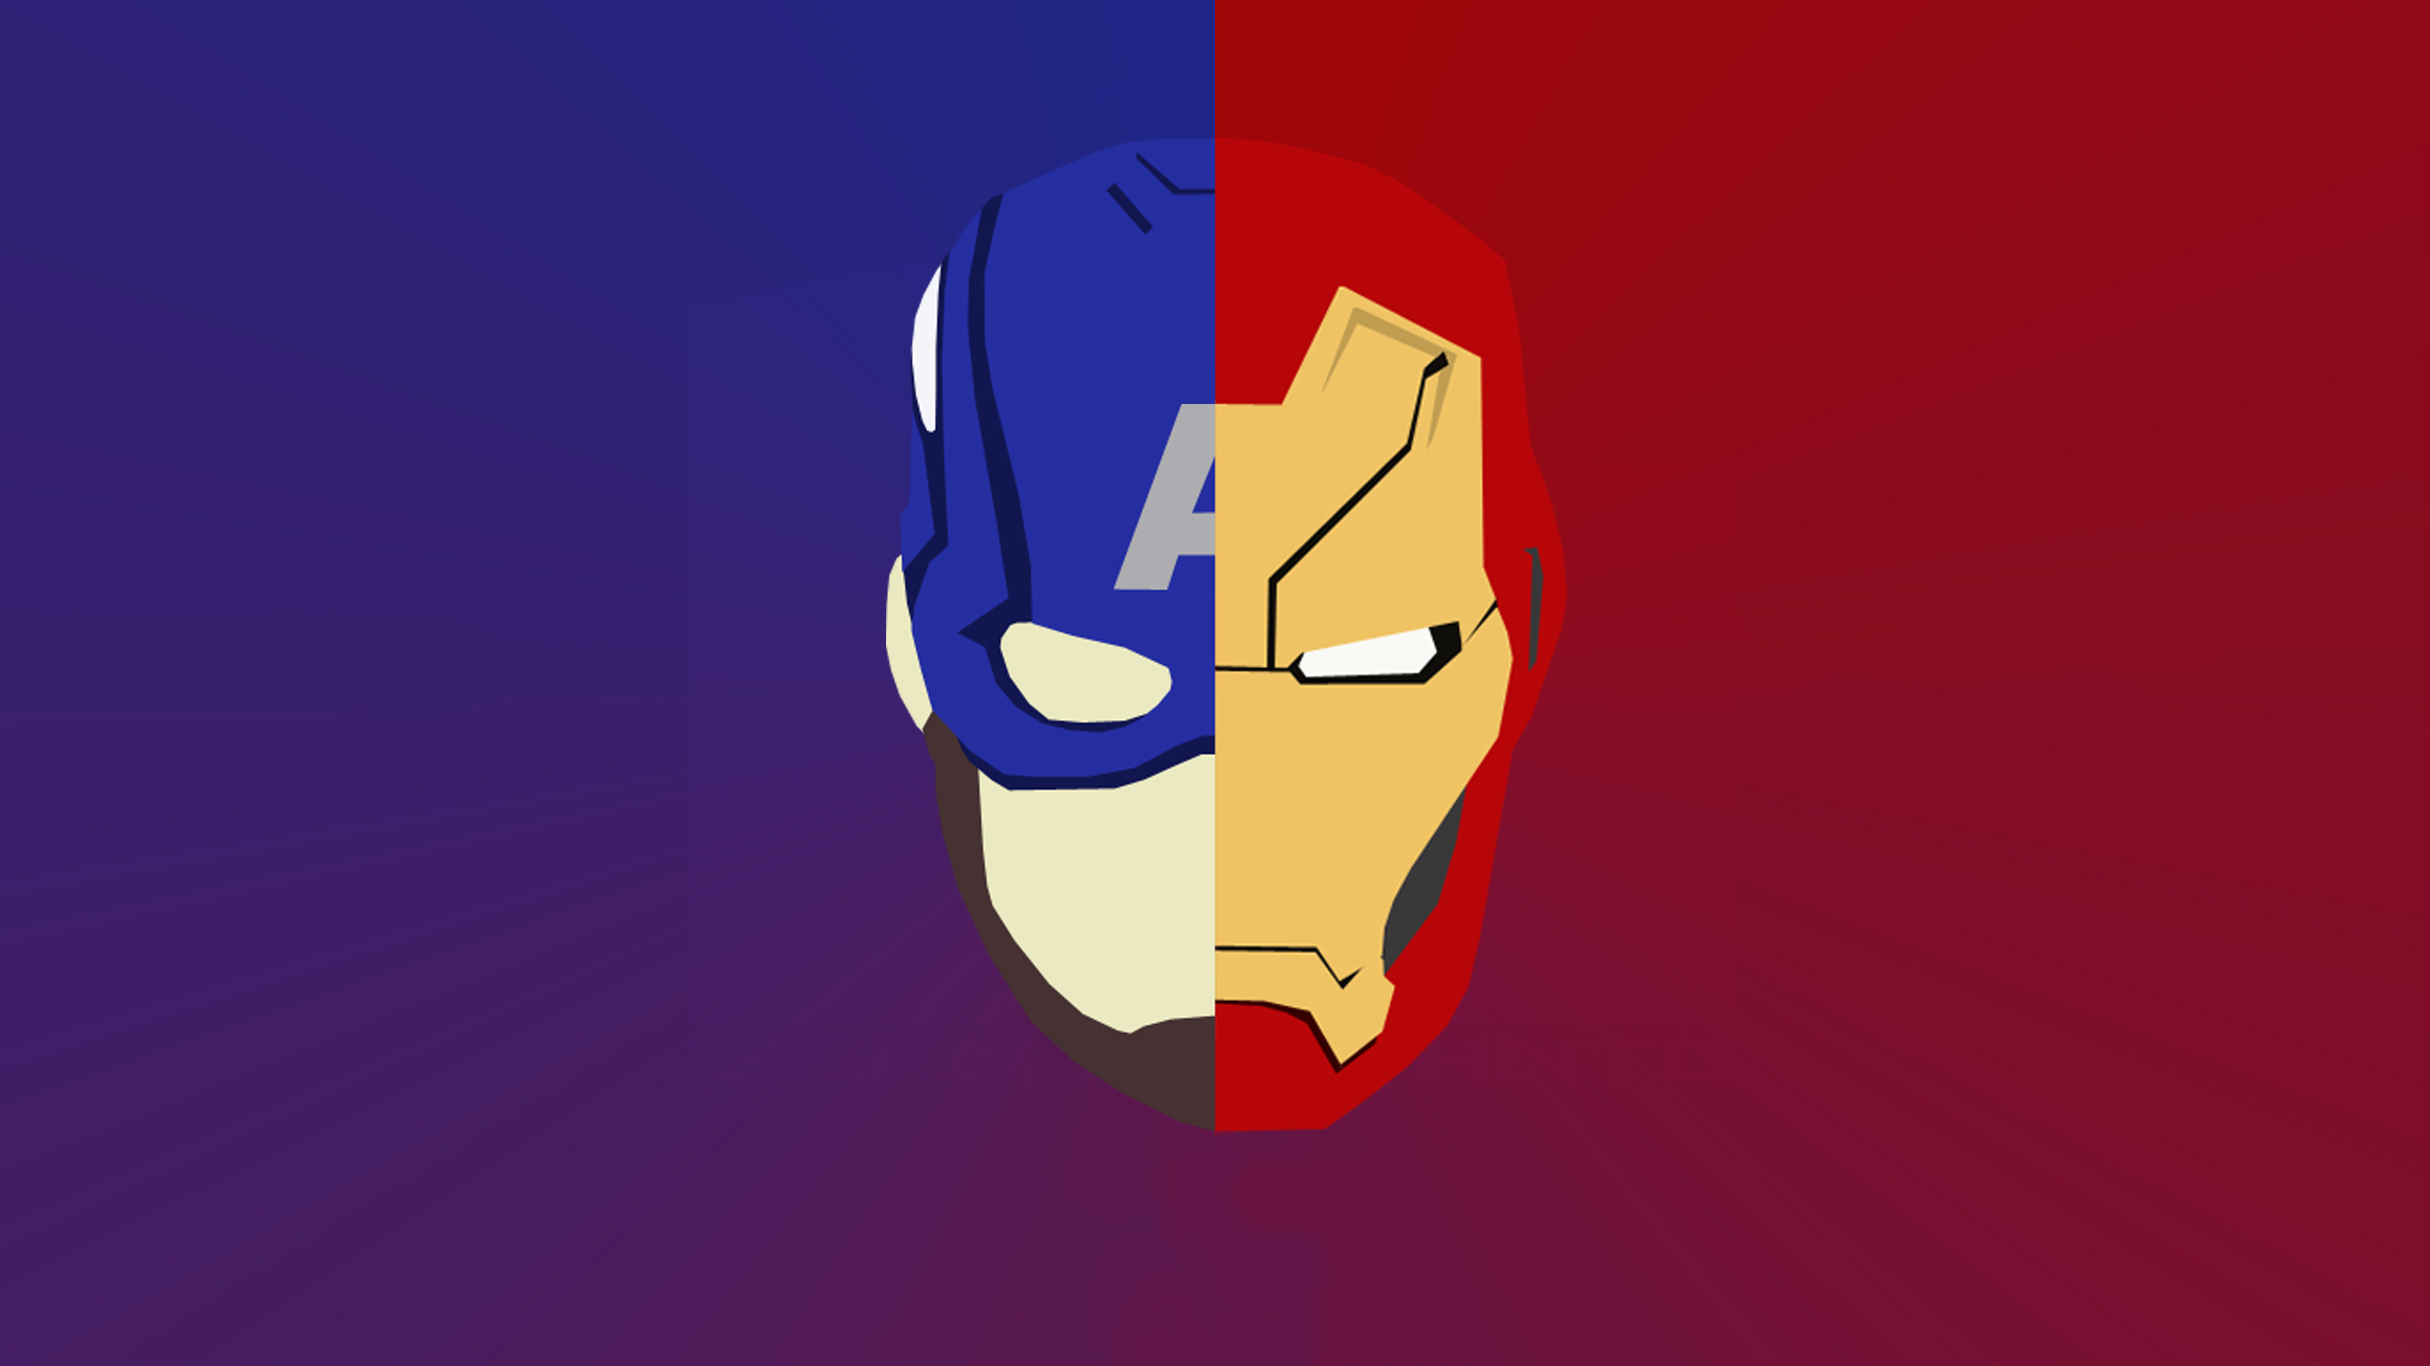 Iron Man And Captain America Artwork, HD Superheroes, 4k Wallpapers,  Images, Backgrounds, Photos and Pictures